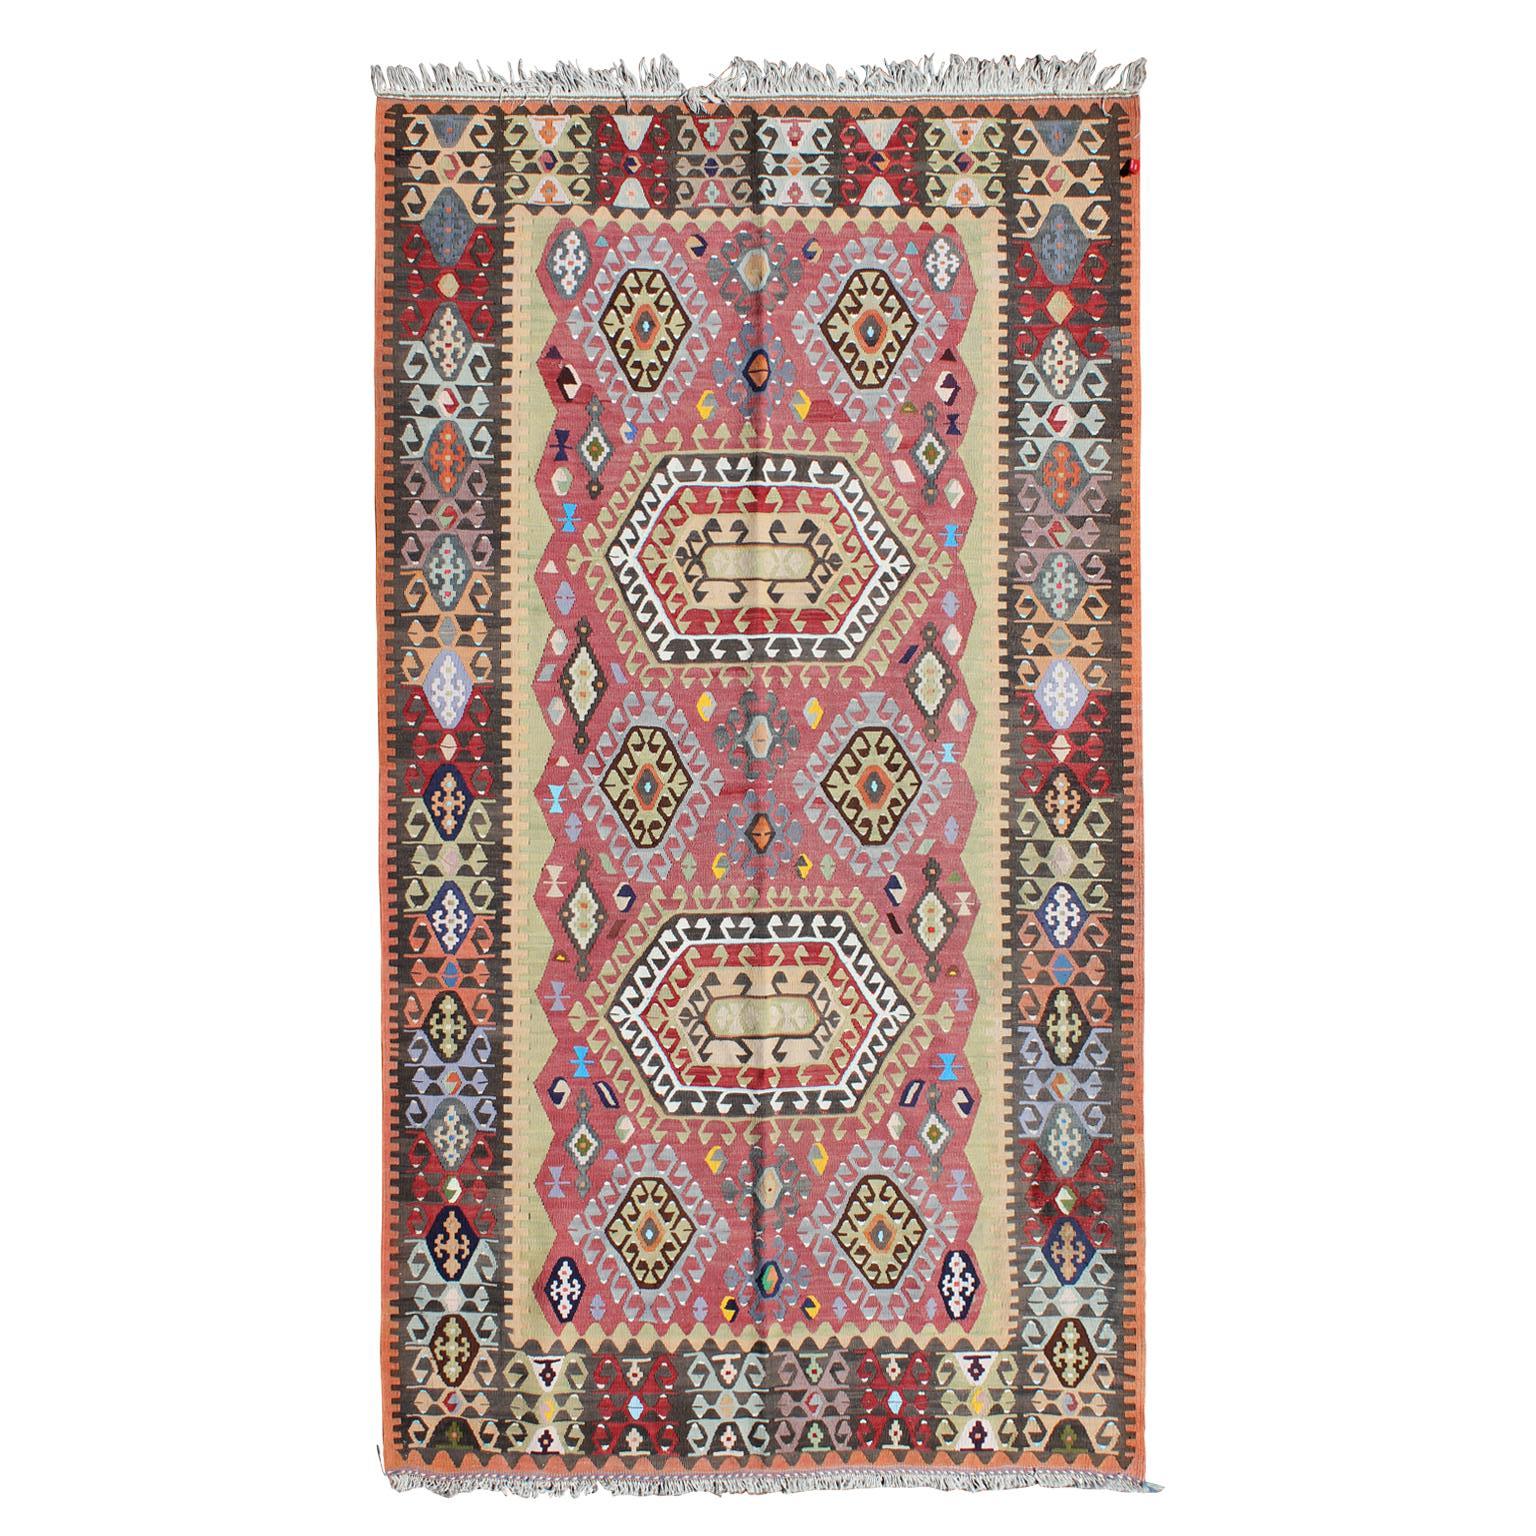 Tribal Print Wool Turkish Kilim with Red, Brown, and Blue Tones